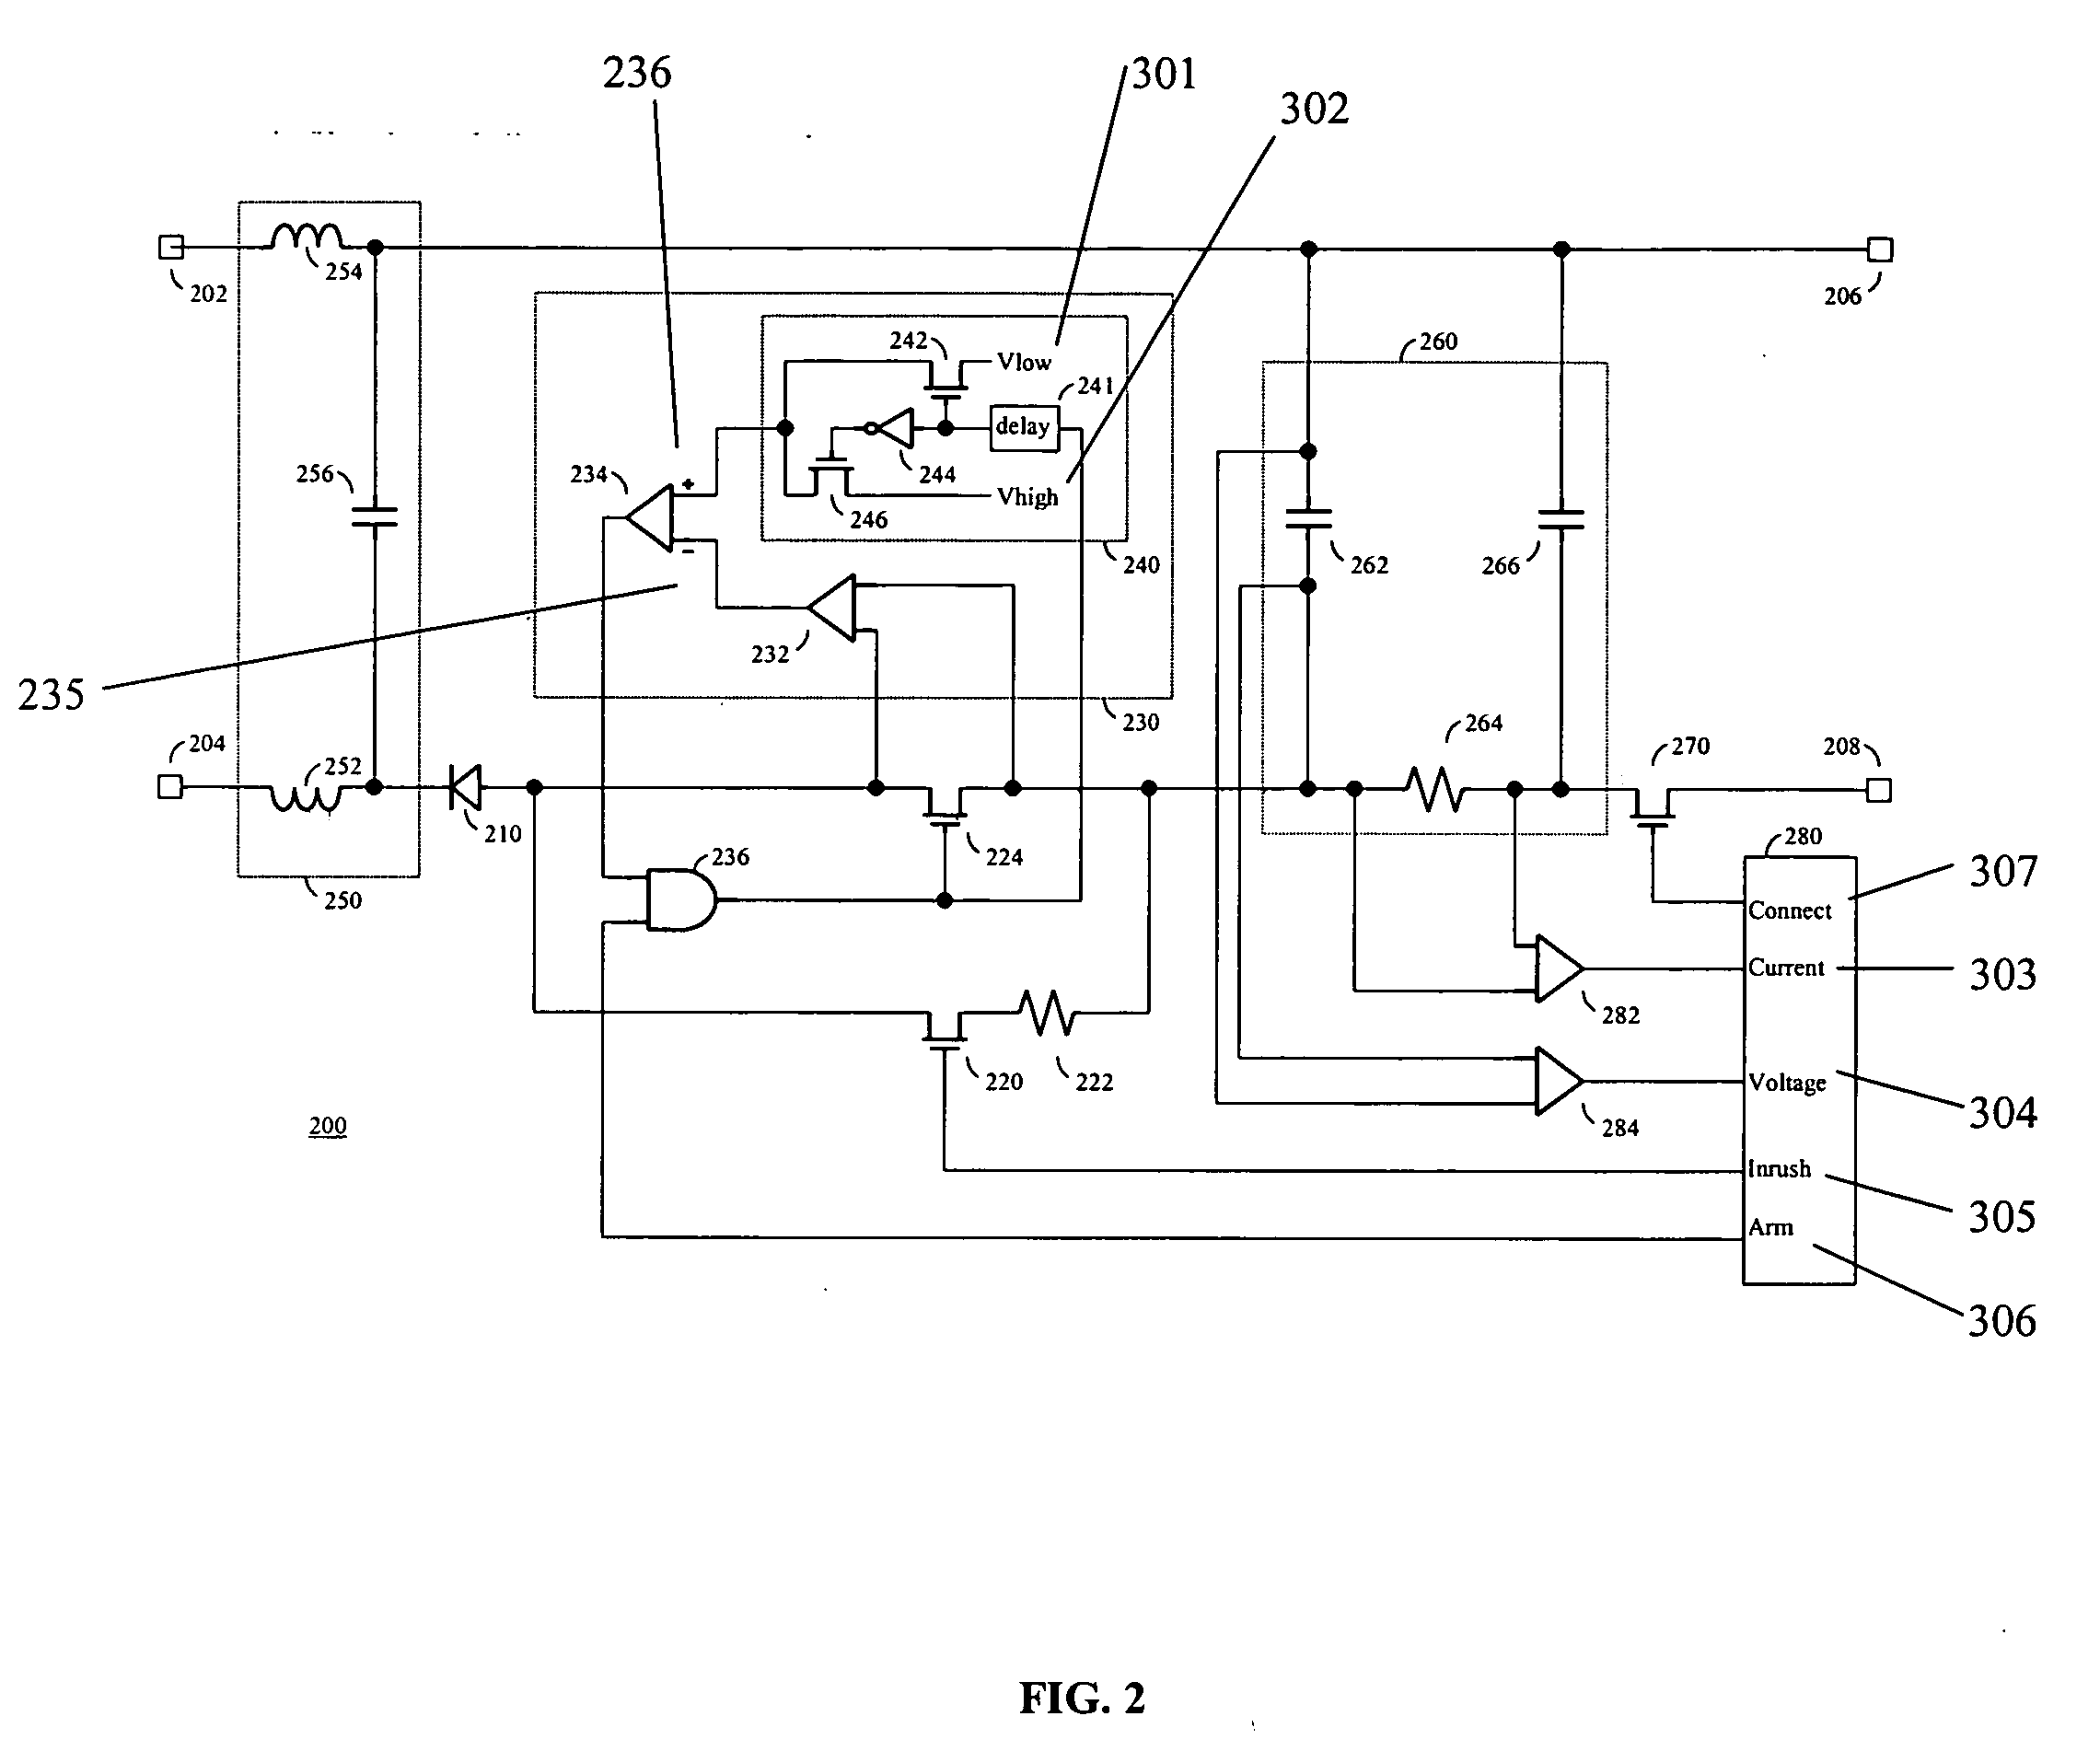 System and method for the powering and fault protection of remote telecommunications equipment